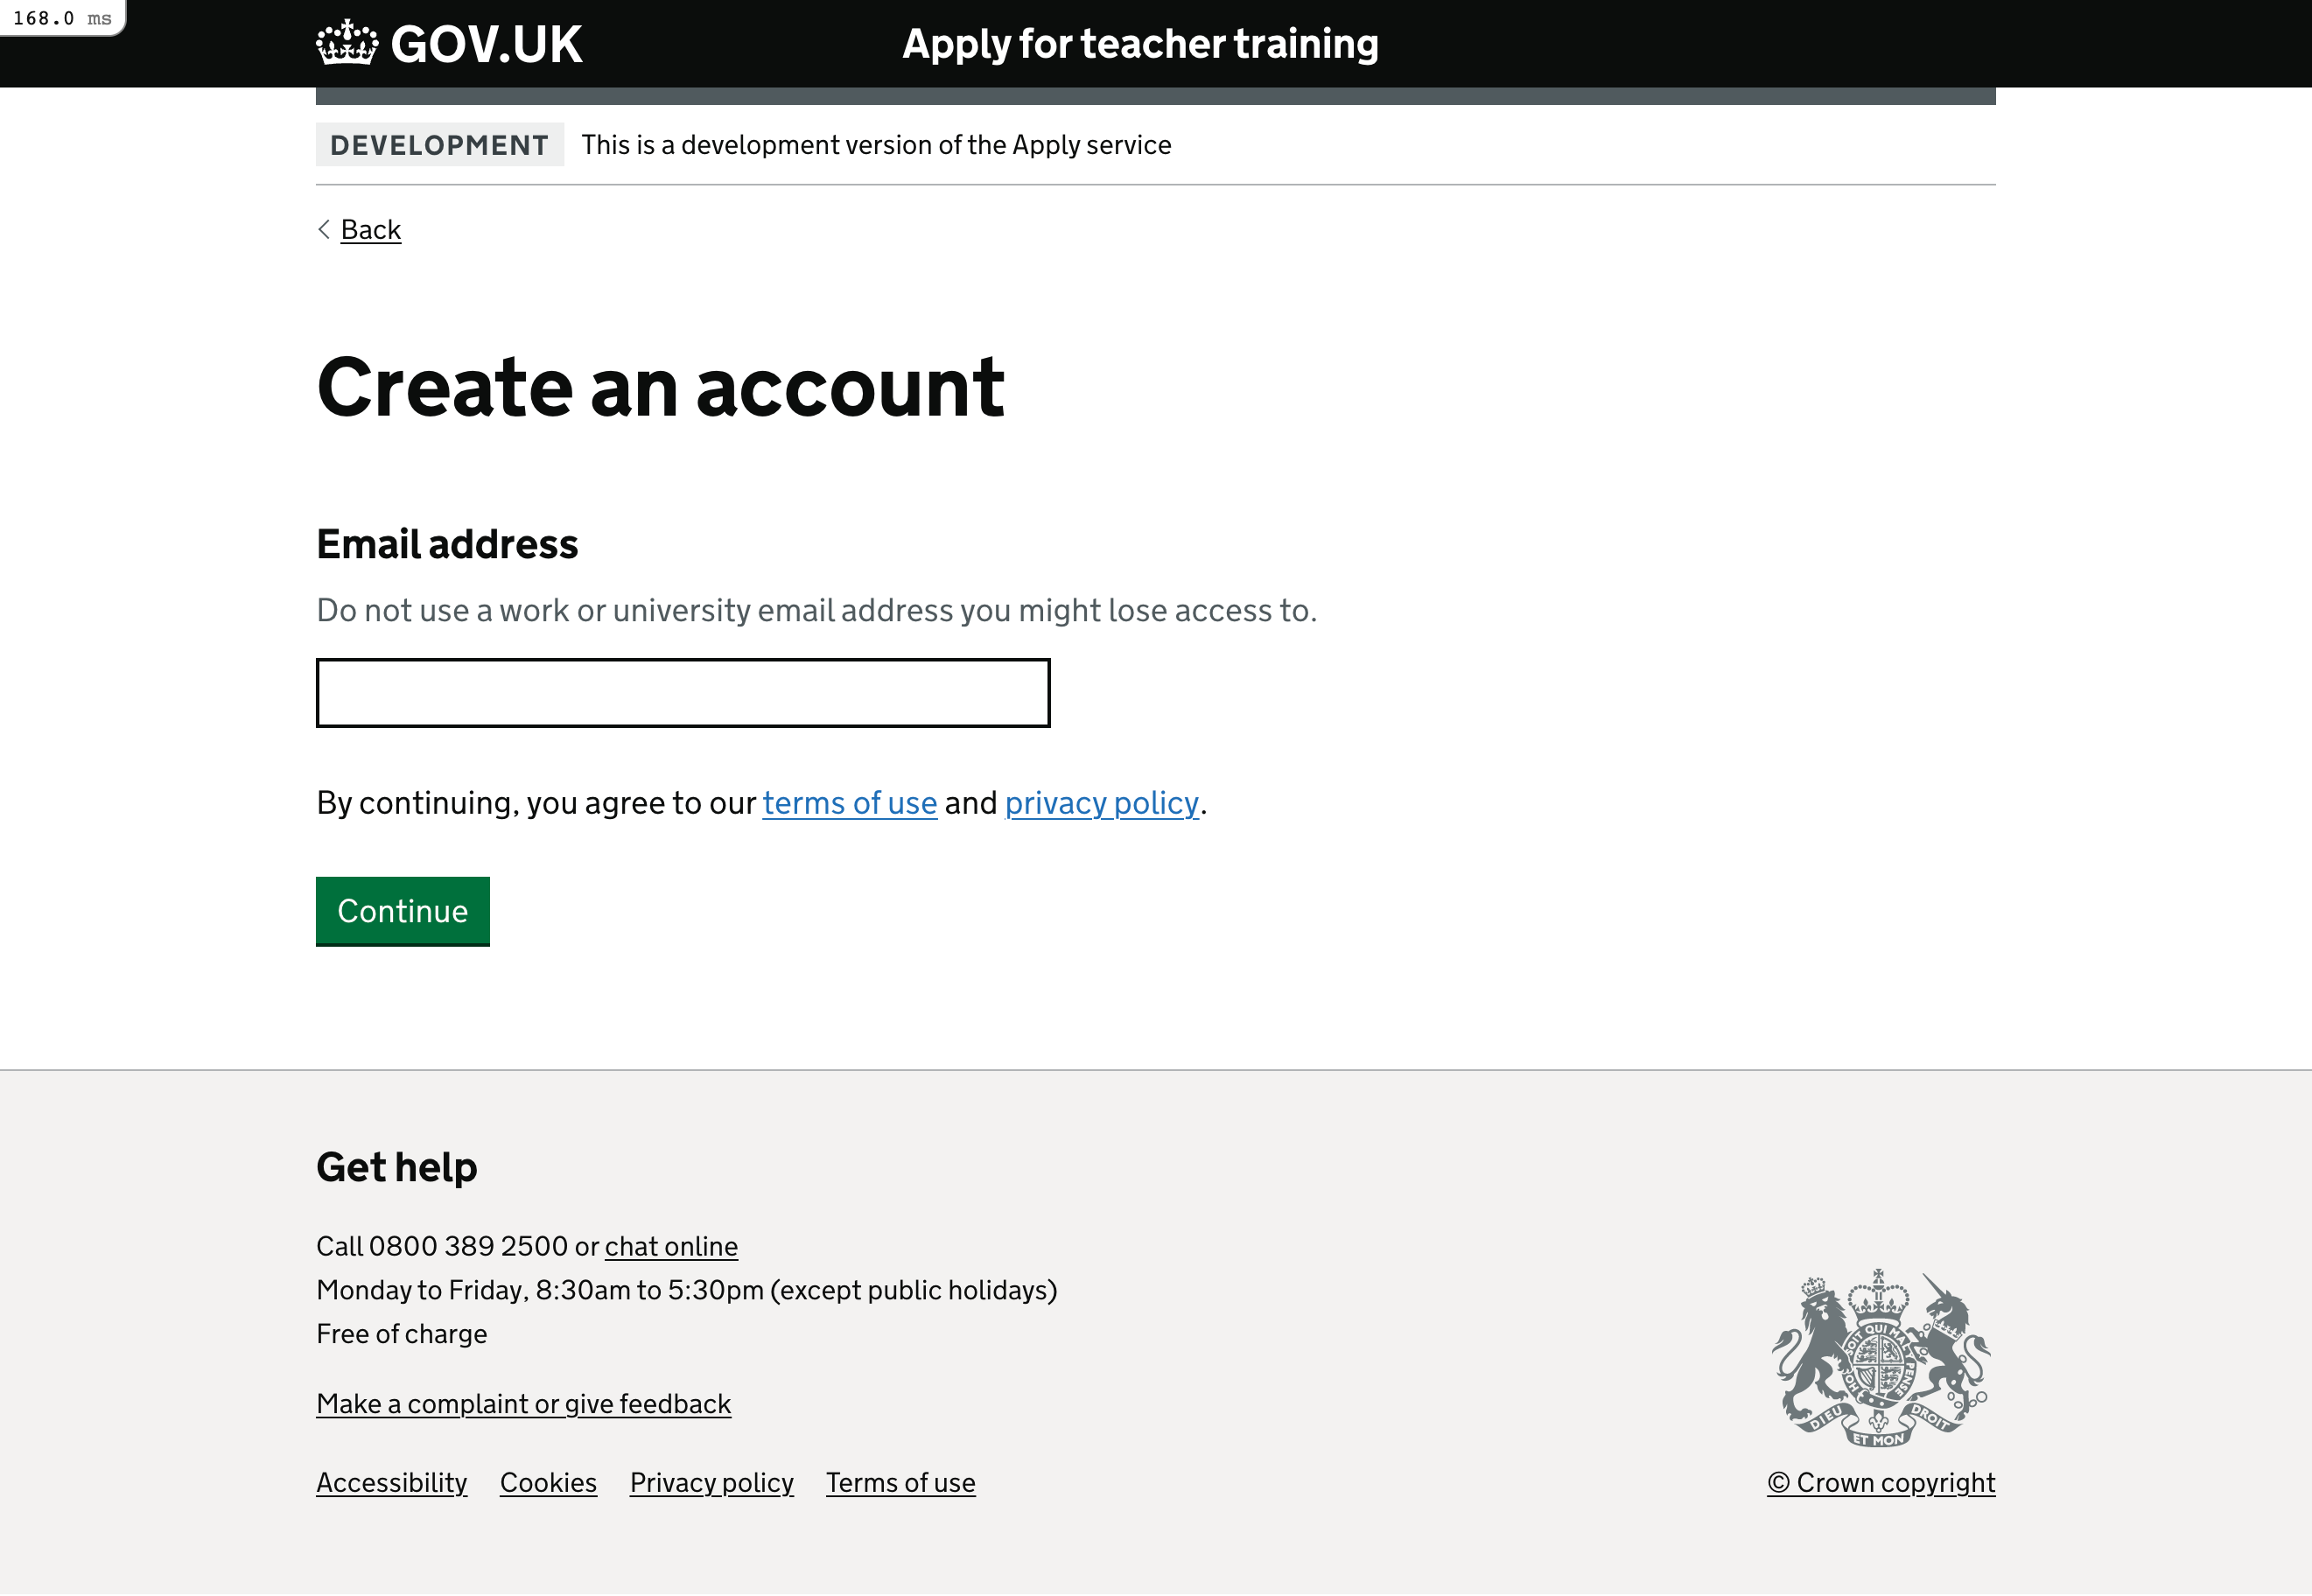 Screenshot showing sign up page containing just the line 'By continuing you agree to our terms of use and privacy policy.'